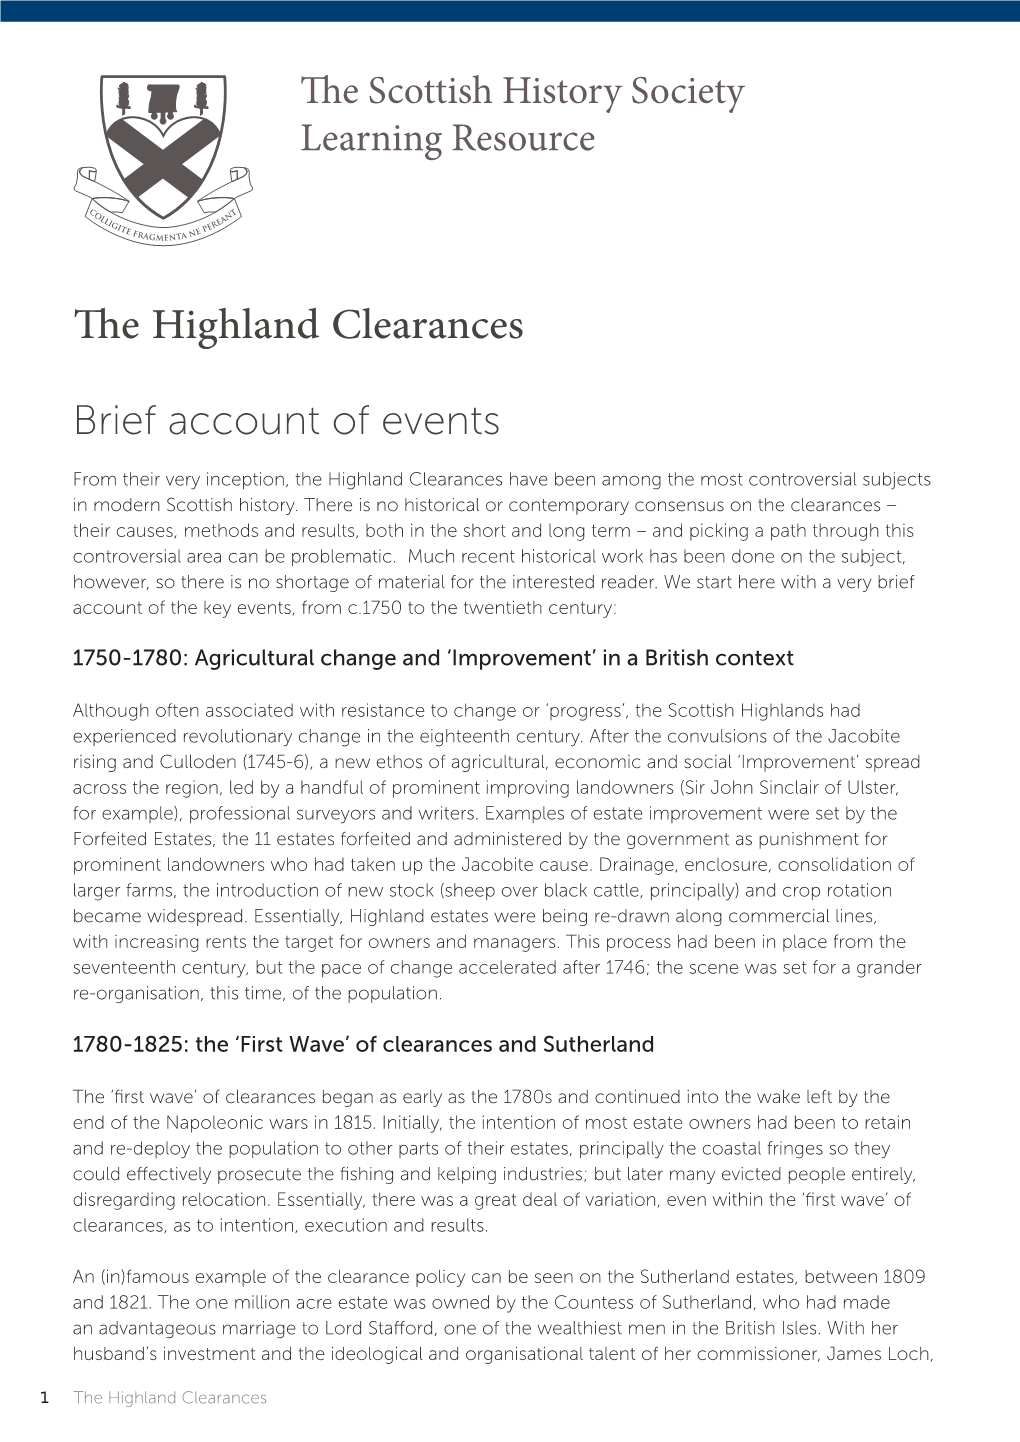 The Highland Clearances Brief Account of Events